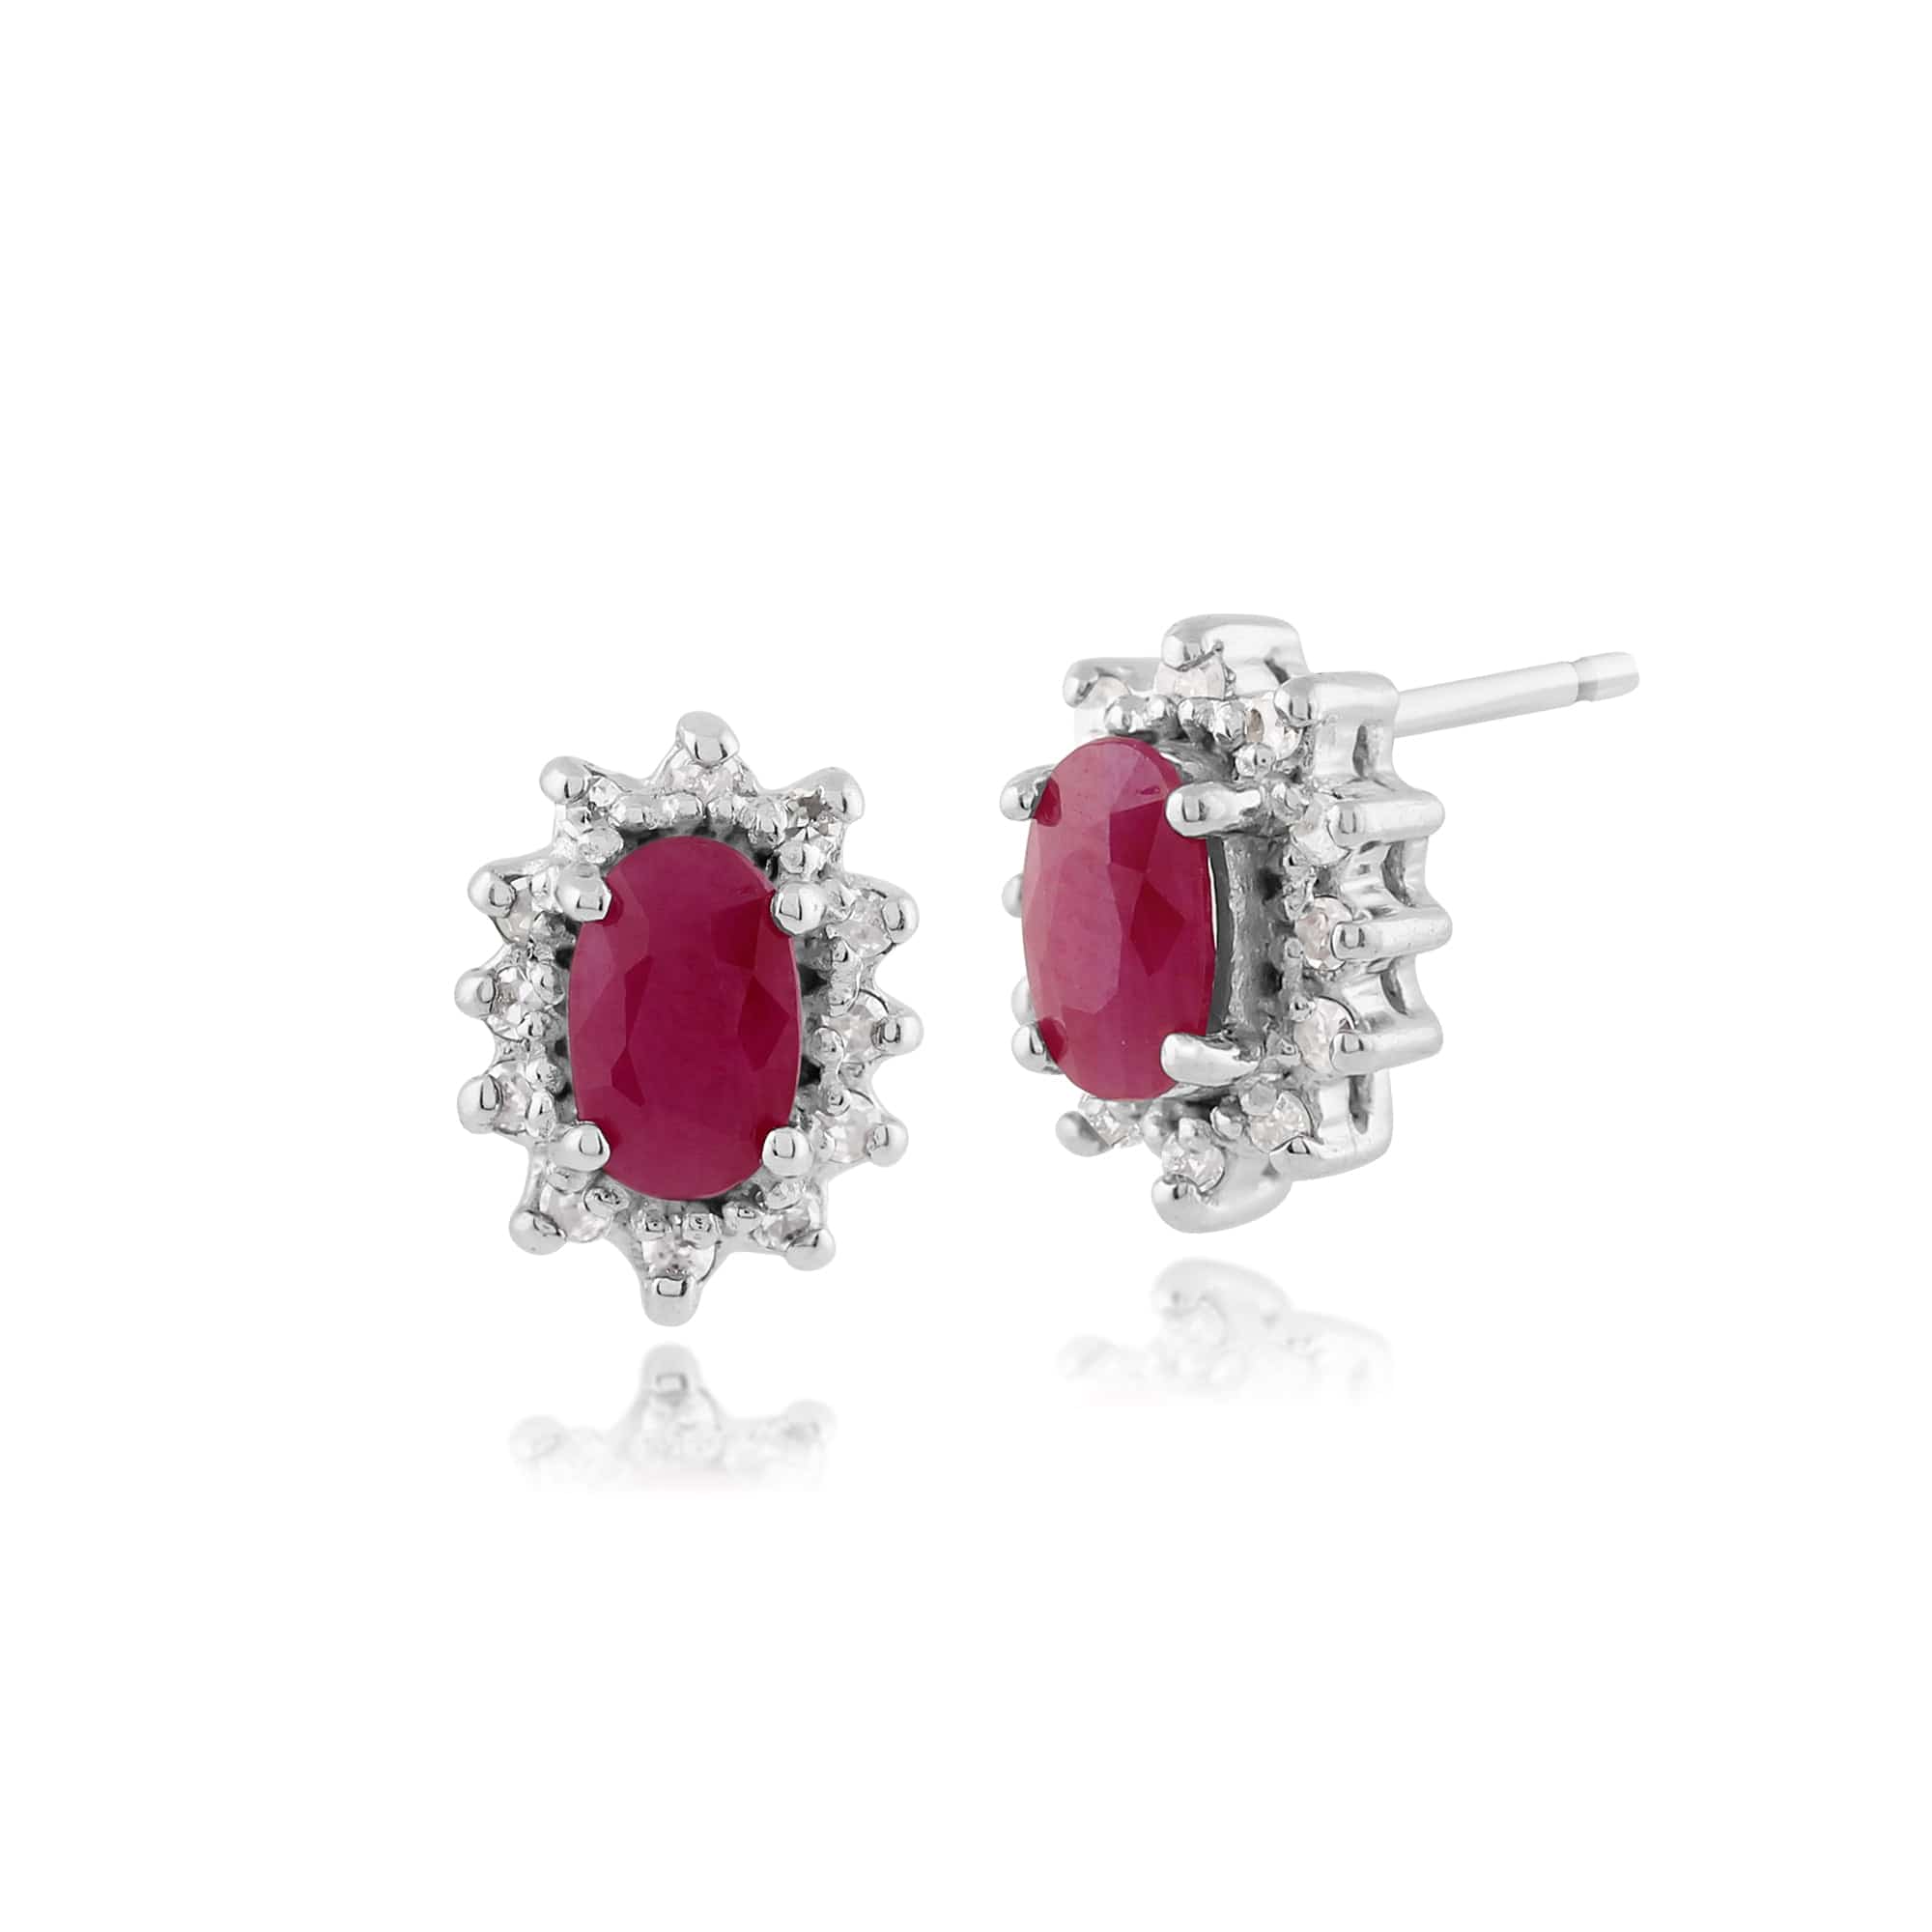 Classic Oval Ruby & Diamond Cluster Stud Earrings in 9ct White Gold 5x3mm - Gemondo